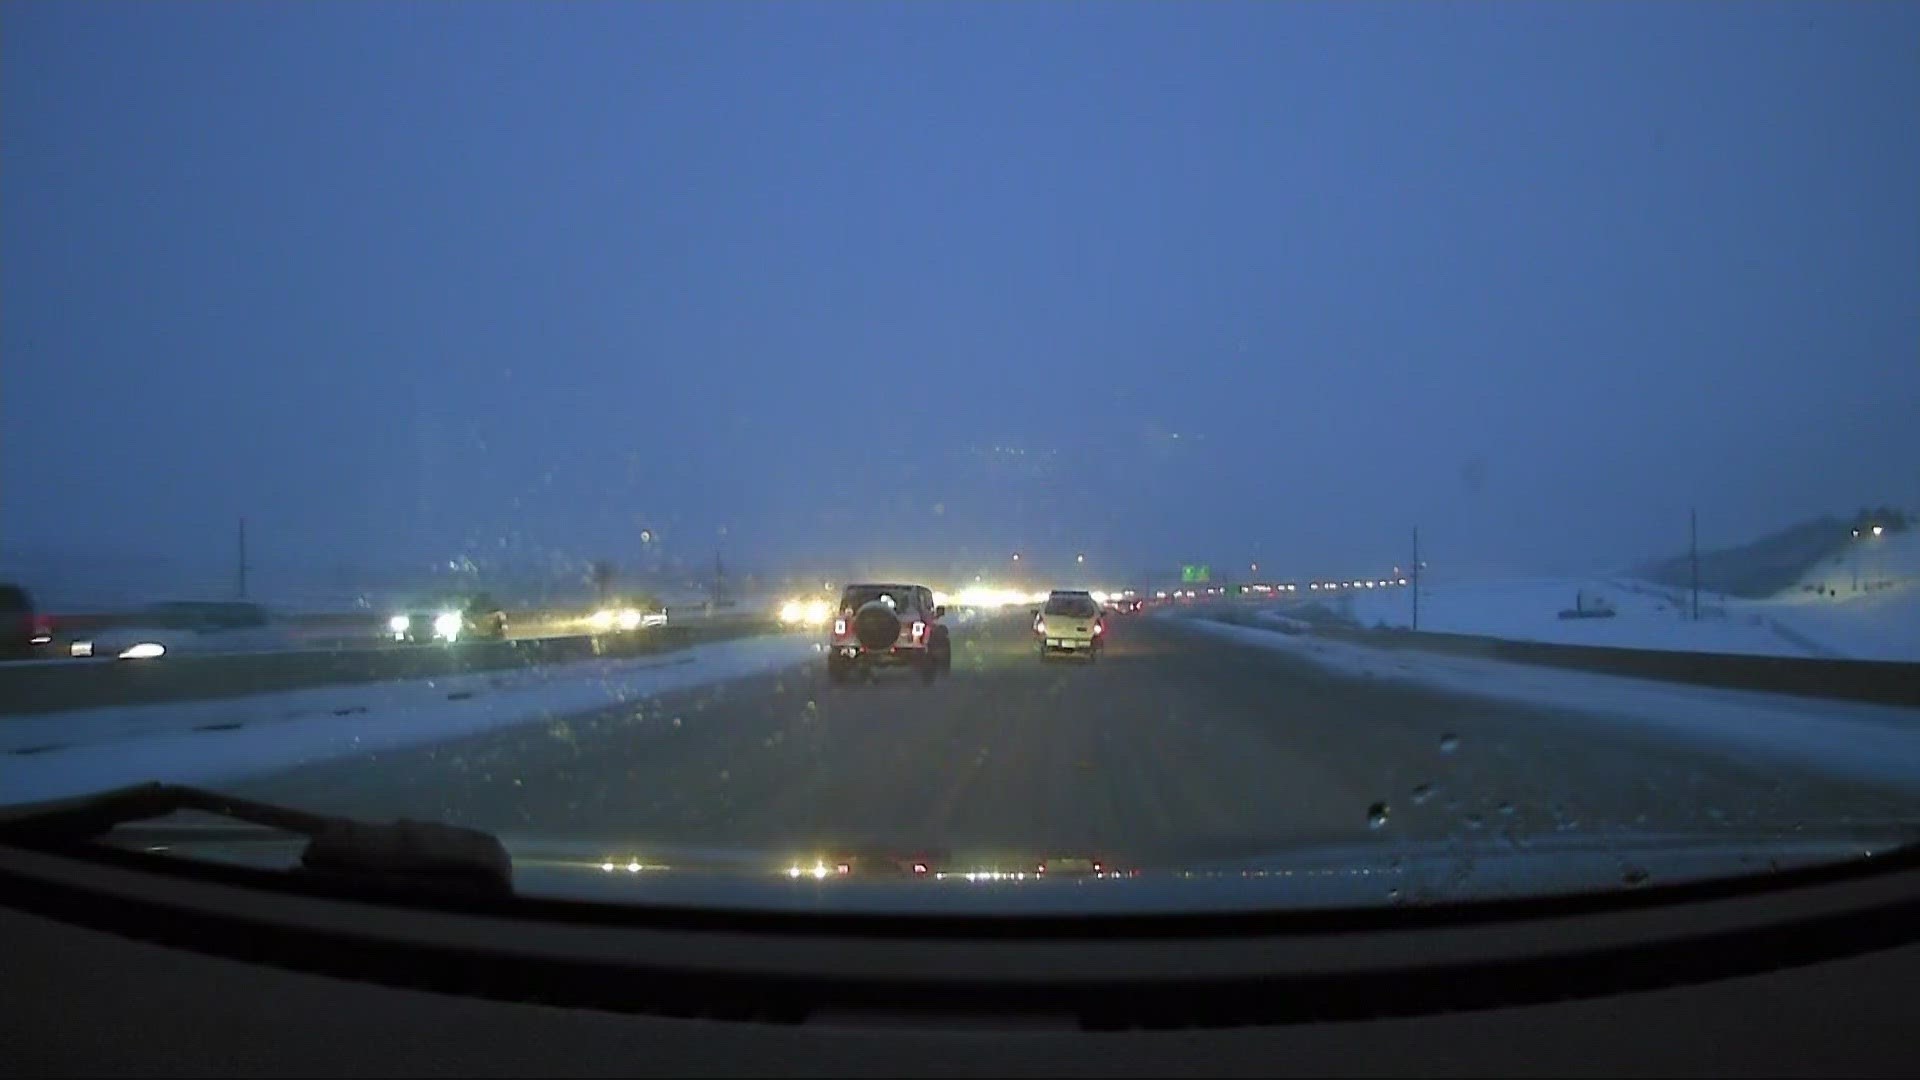 9NEWS reporter Courtney Yuen has a look at road conditions Monday morning along C-470 near Morrison Road following overnight snow.